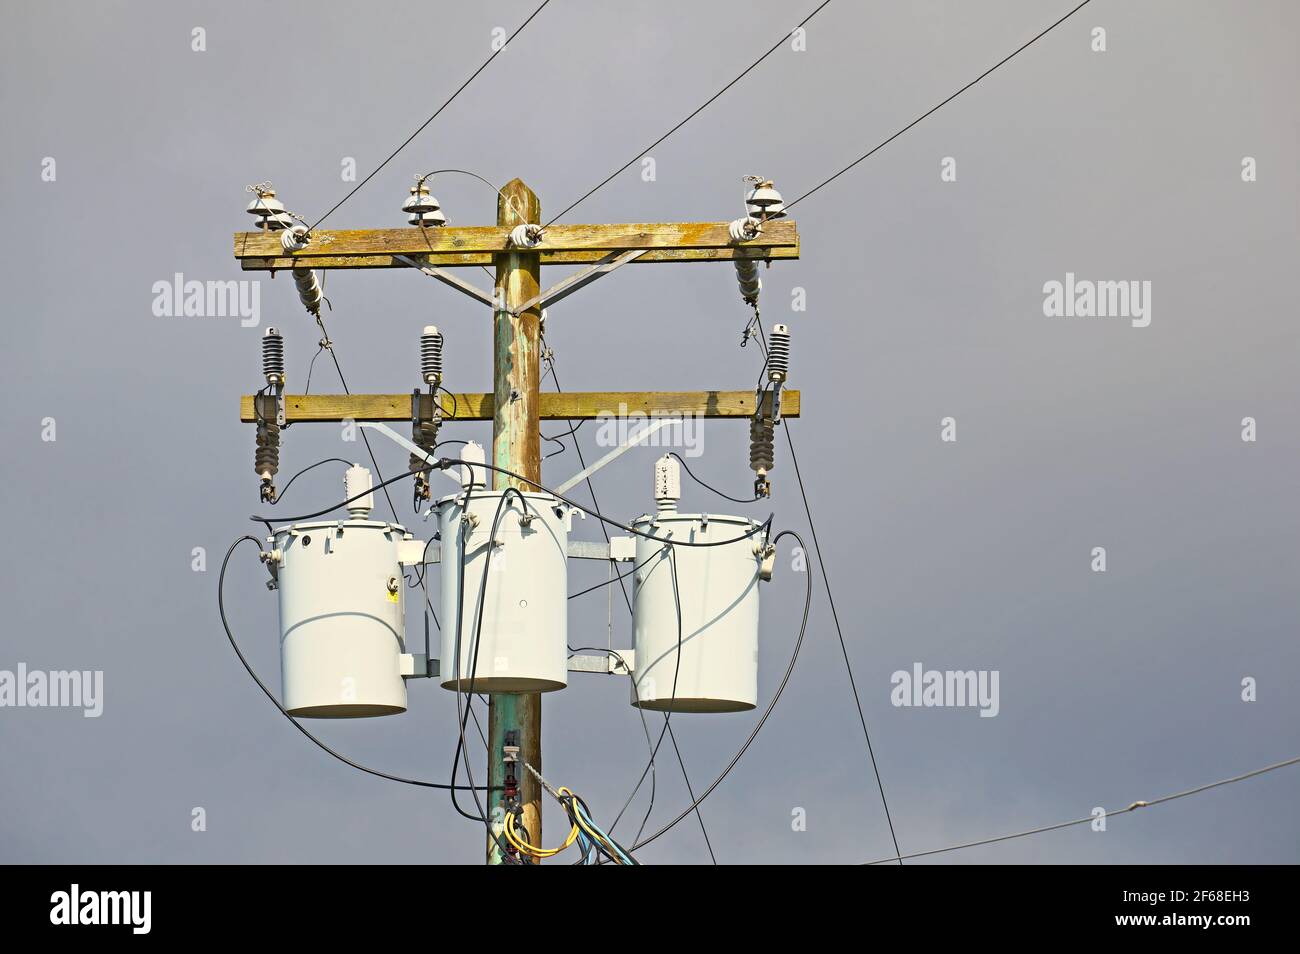 Power lines and transformers against a stormy sky.  Stock photo. Stock Photo